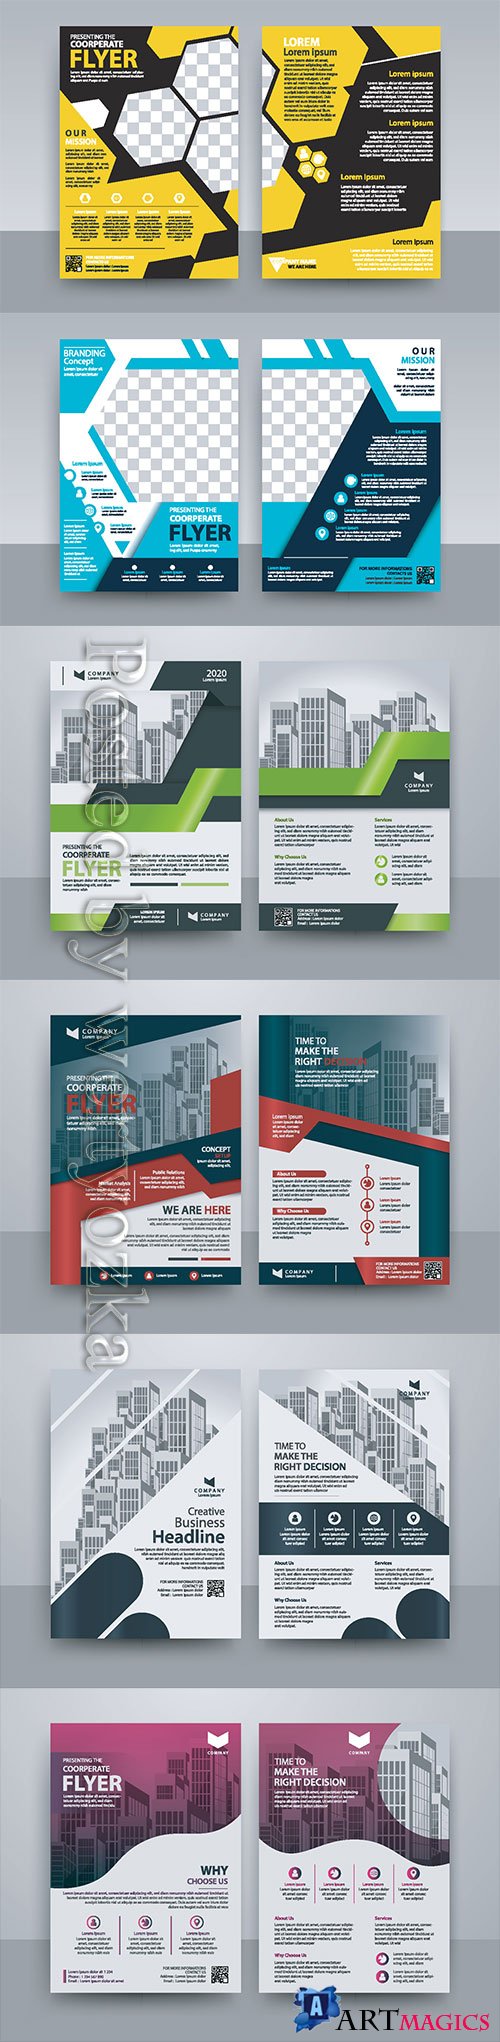 Business vector template for brochure, annual report, magazine